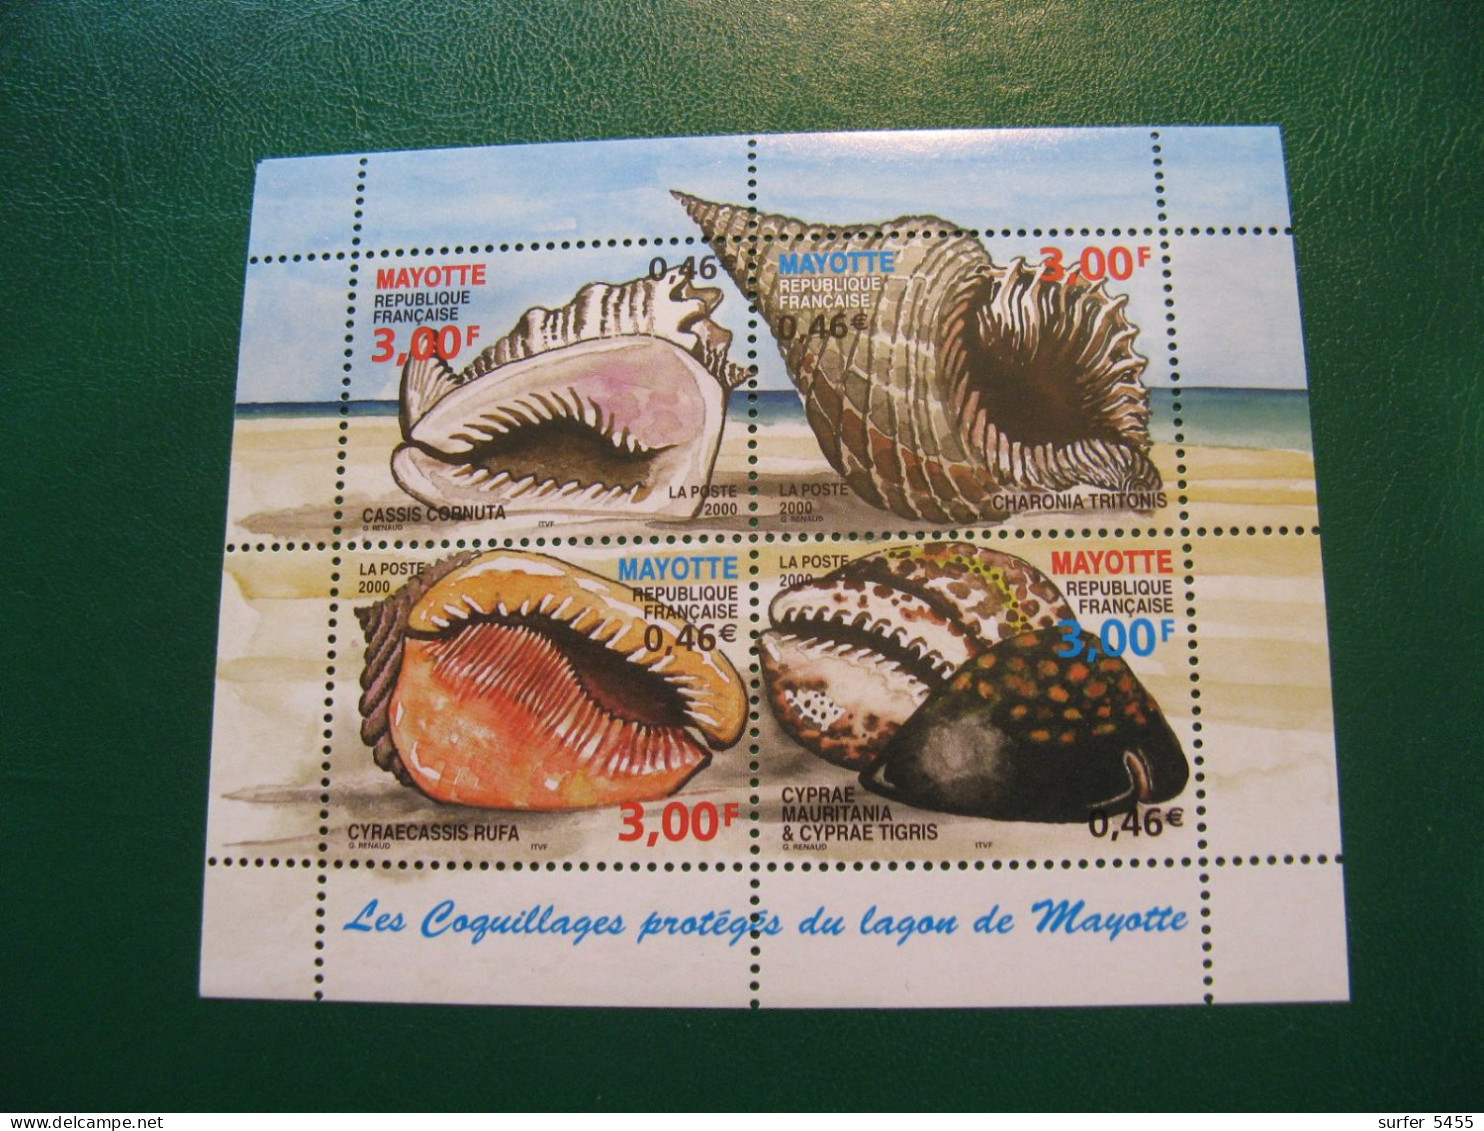 MAYOTTE BLOC FEUILLET N° 4 NEUF** LUXE - MNH - COTE 16,00 EUROS - Neufs